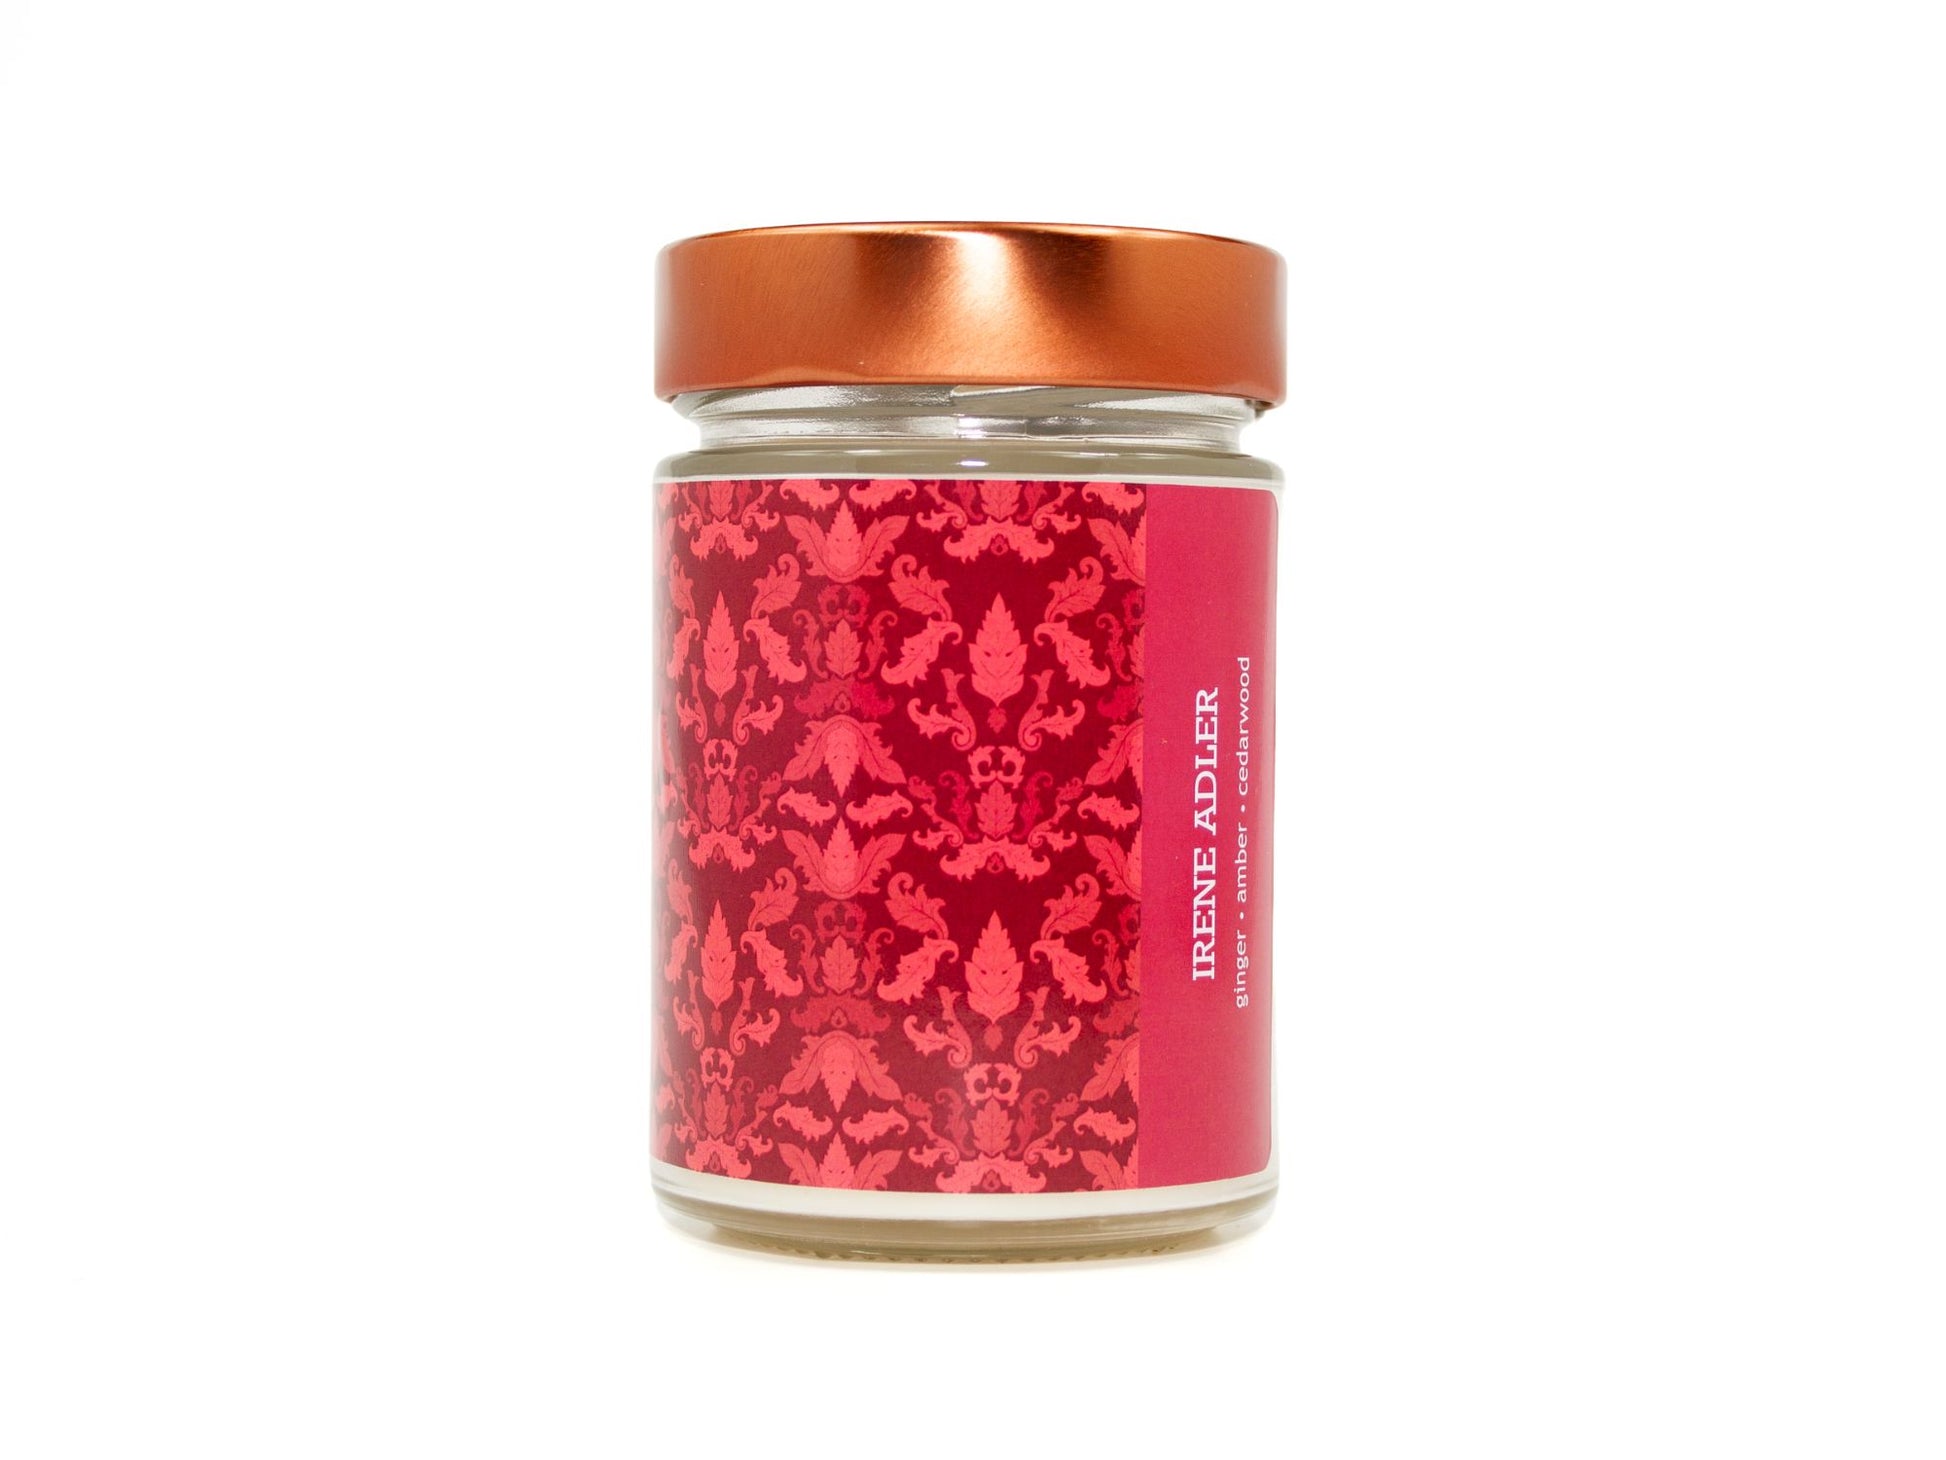 Onset & Rime ginger and amber scented candle called "Irene Adler" in a 10 oz glass jar with copper lid. The label is a deep red Victorian pattern. The text on the label is "Irene Adler - Ginger, Amber, Cedarwood".